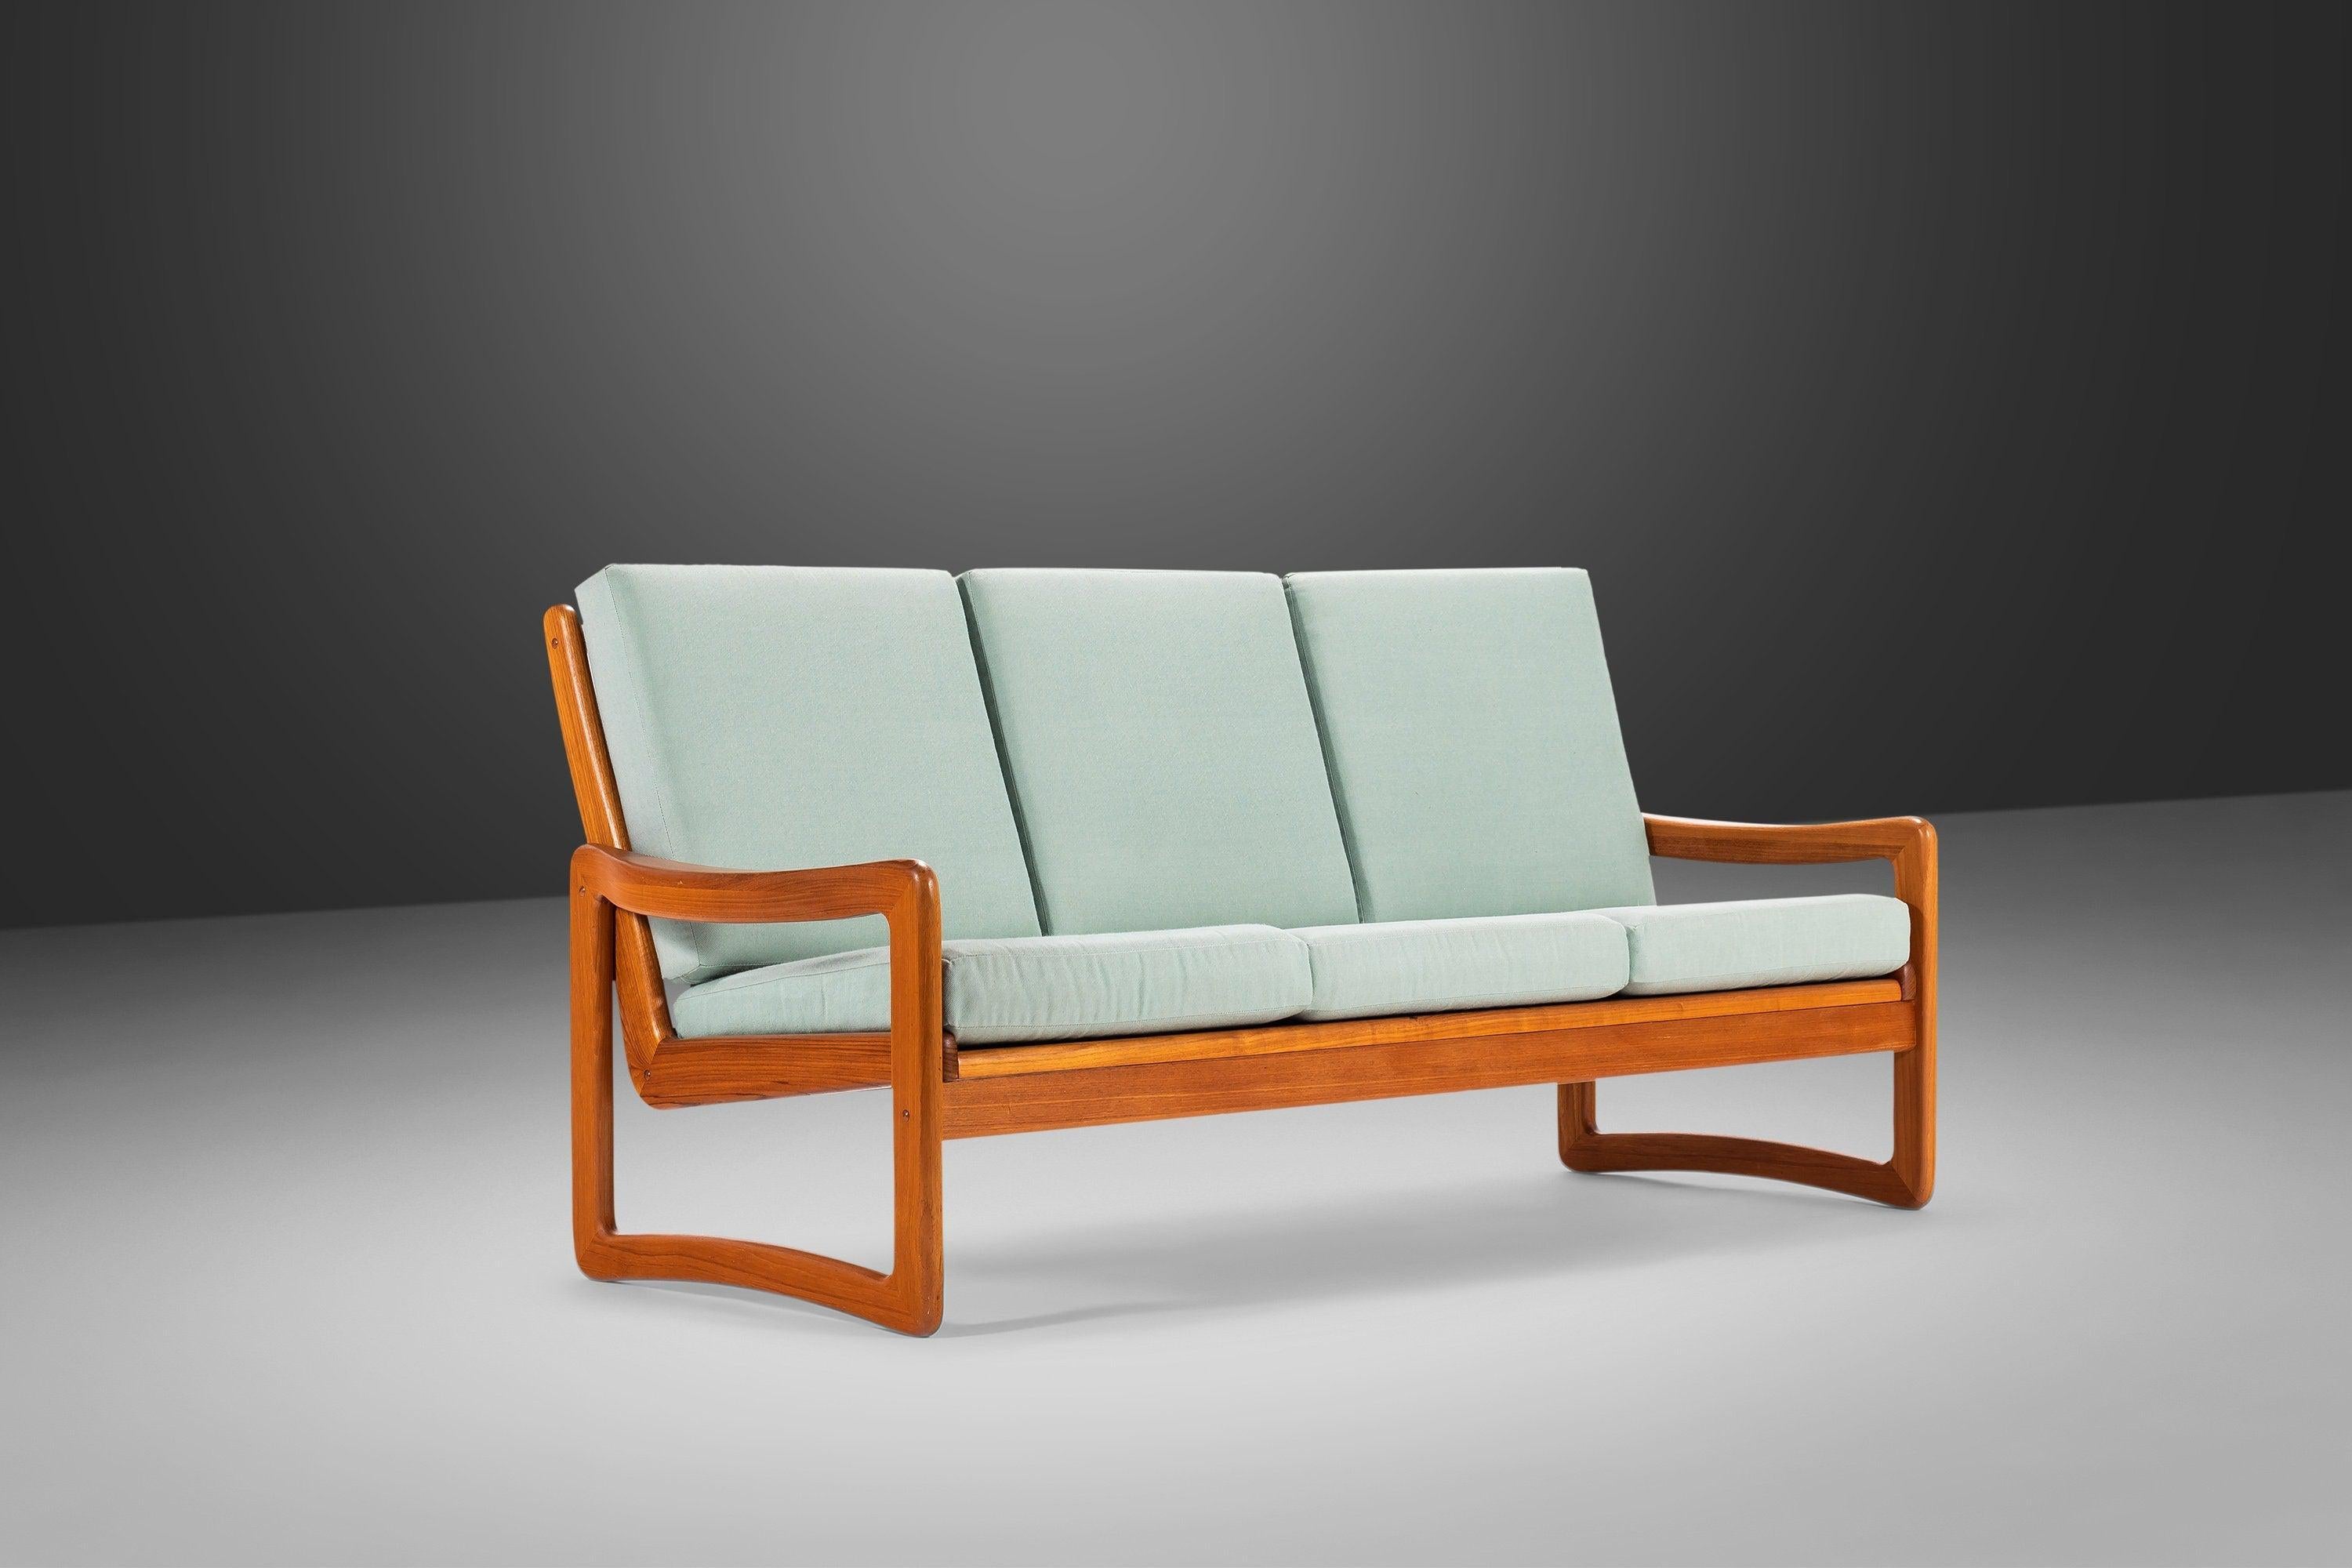 Exceptional vintage solid teak three-seater sofa by Sun Cabinet. The Danish modern design features an elegantly contoured U-shaped leg that joins seamlessly with the arms. The ladder rung backside is particularly striking, elevating this lounge